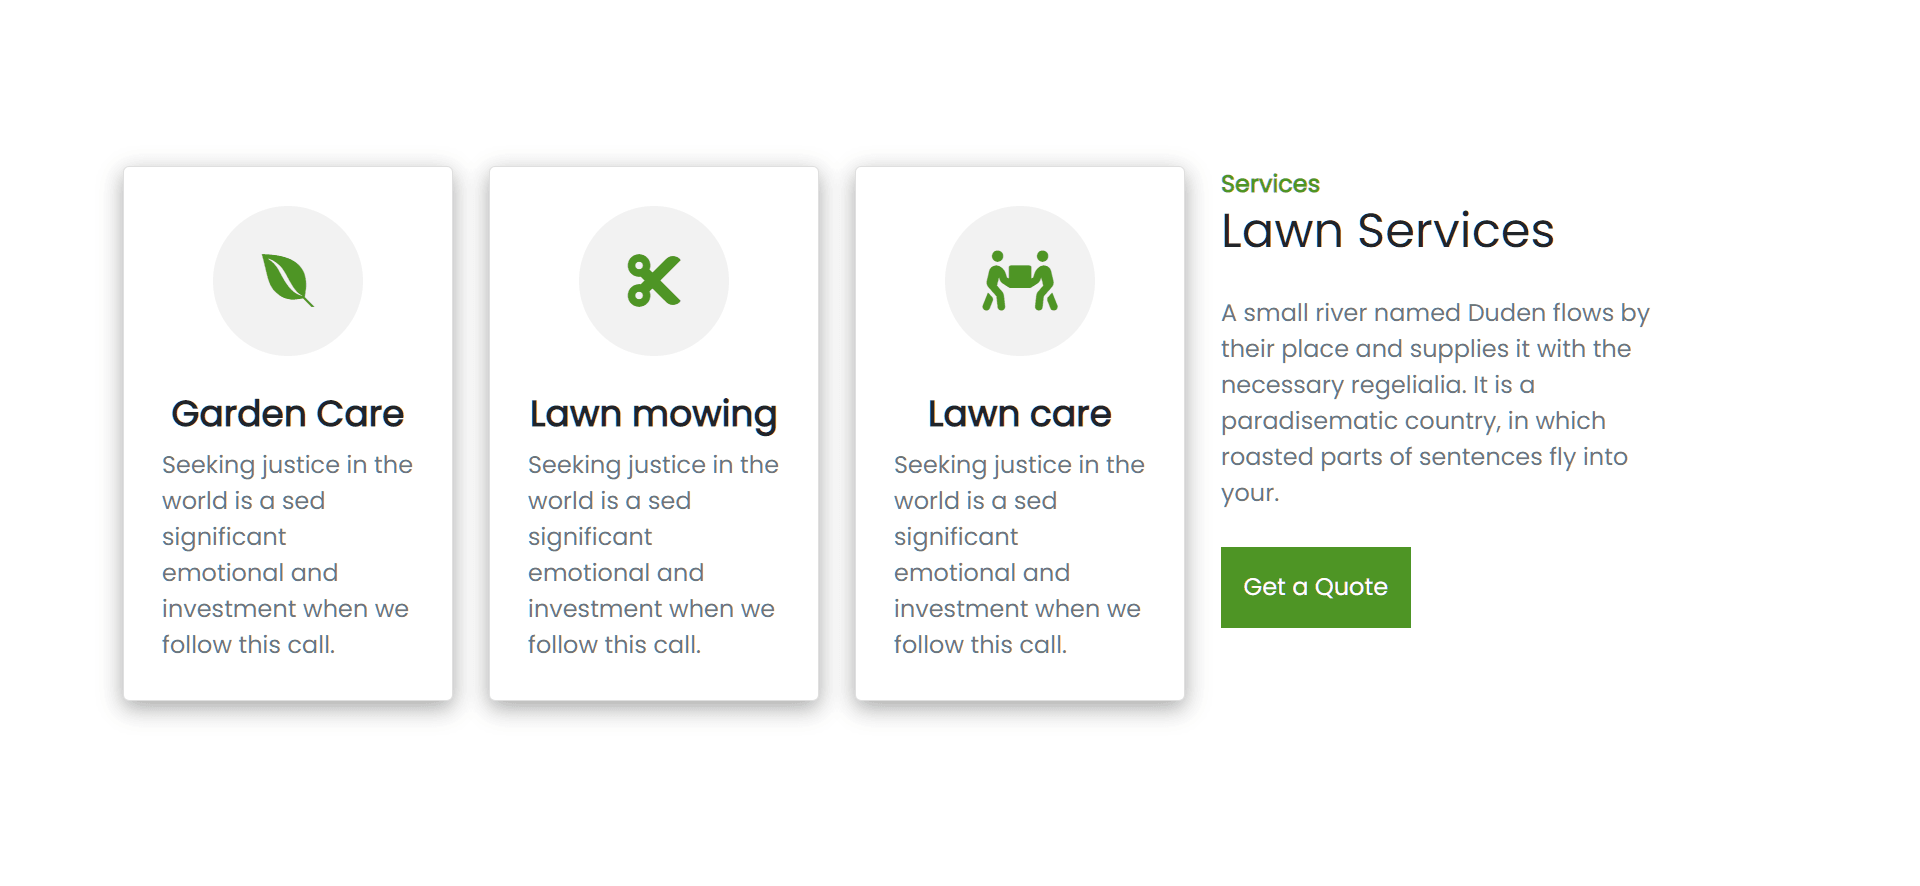 Our services with hover effect